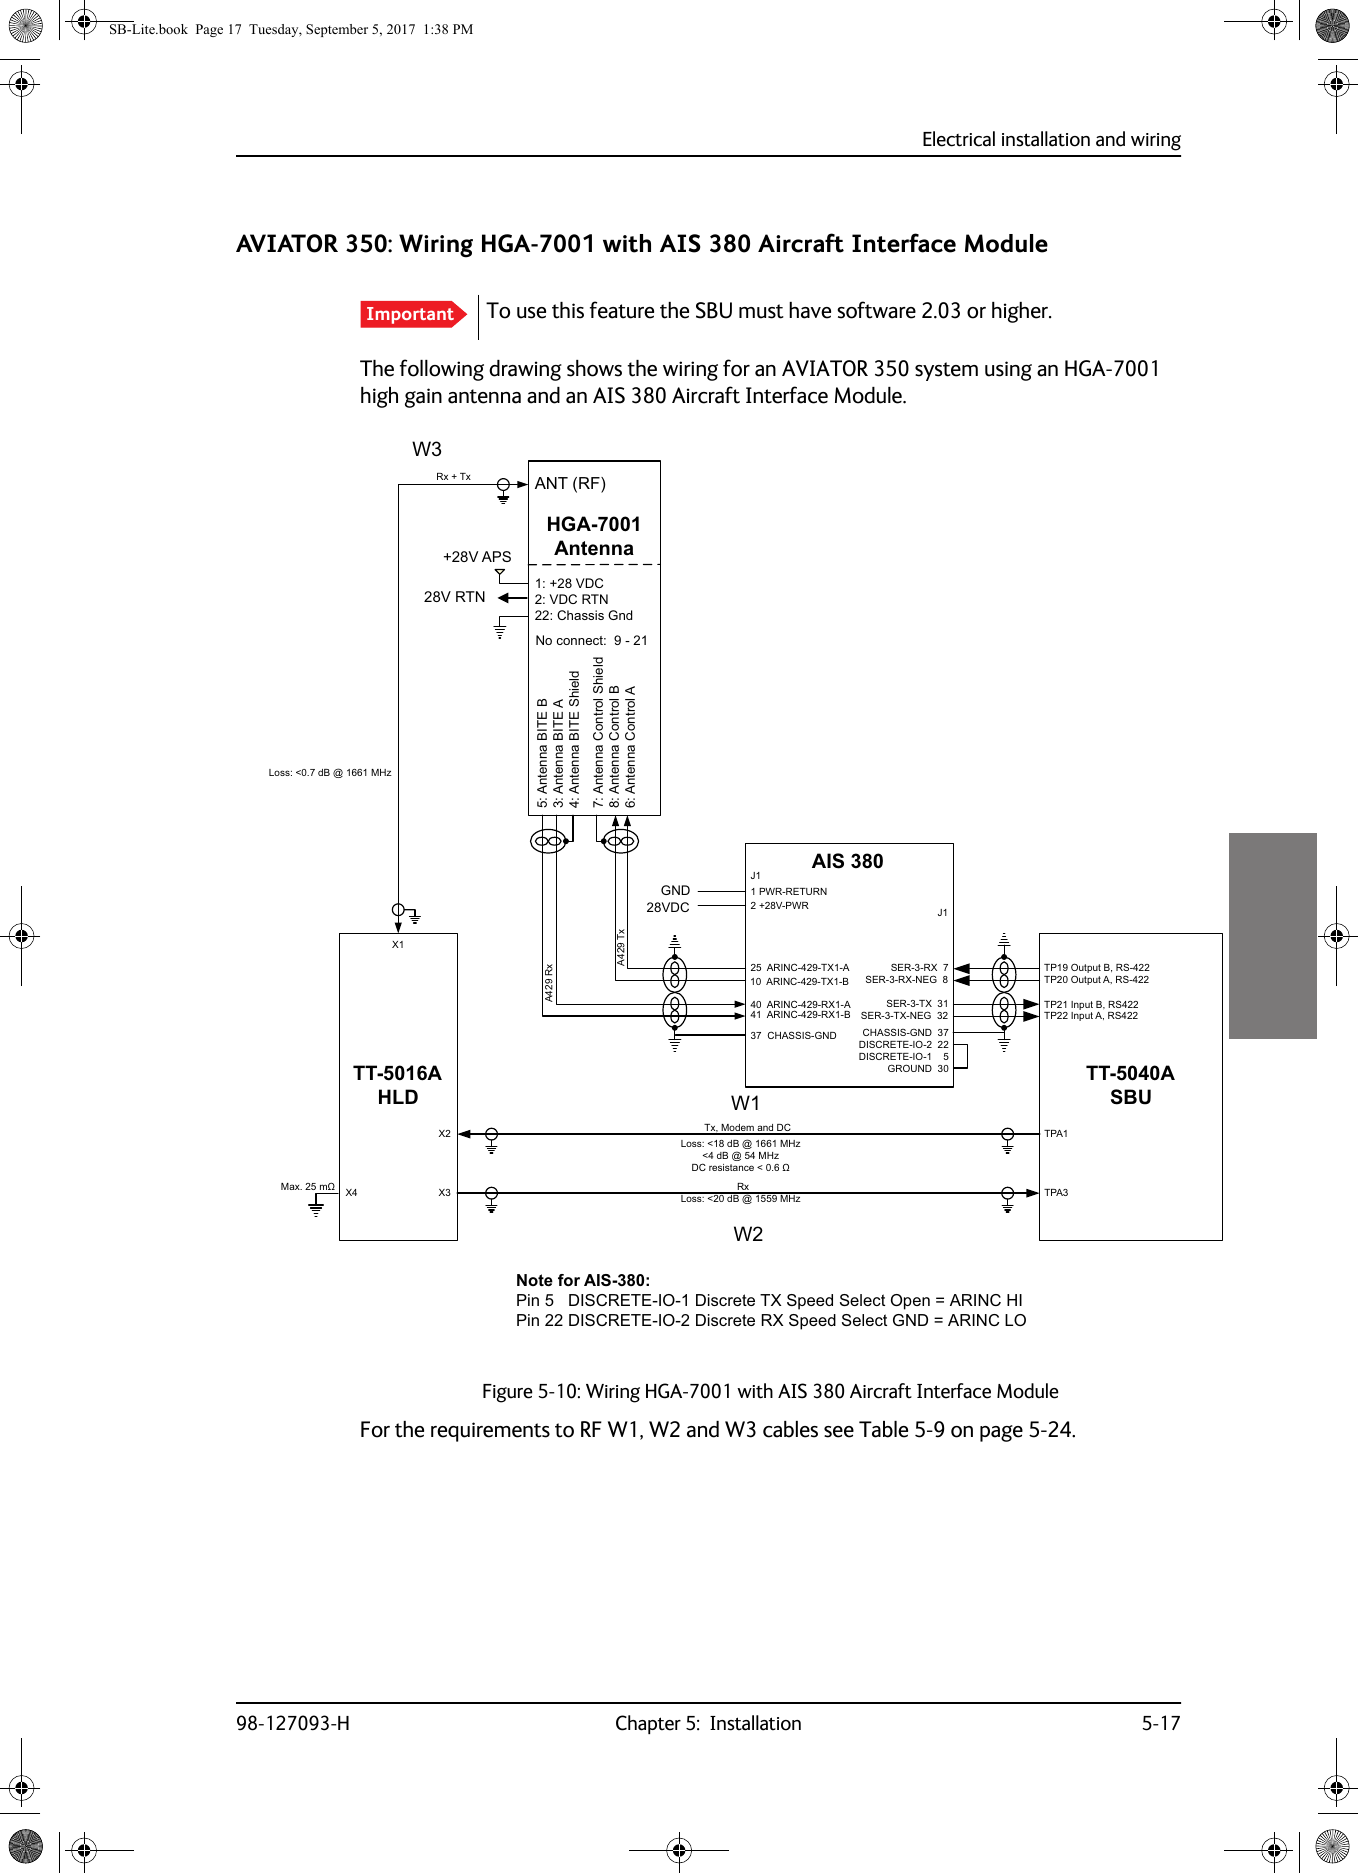 Electrical installation and wiring98-127093-H Chapter 5:  Installation 5-175555AVIATOR 350: Wiring HGA-7001 with AIS 380 Aircraft Interface ModuleThe following drawing shows the wiring for an AVIATOR 350 system using an HGA-7001 high gain antenna and an AIS 380 Aircraft Interface Module.Figure 5-10:  Wiring HGA-7001 with AIS 380 Aircraft Interface ModuleFor the requirements to RF W1, W2 and W3 cables see Table  5-9 on page  5-24.Important To use this feature the SBU must have software 2.03 or higher.77$+/&apos;+*$$QWHQQD;77$6%8$7[$5[73$73$;;7[0RGHPDQG&apos;&amp;5[5[7[$175)1RFRQQHFW9$36$QWHQQD%,7(%$QWHQQD%,7($$QWHQQD%,7(6KLHOG$QWHQQD&amp;RQWURO6KLHOG$QWHQQD&amp;RQWURO%$QWHQQD&amp;RQWURO$9&apos;&amp;9&apos;&amp;571&amp;KDVVLV*QG95710D[Pȍ ;/RVVG%#0+]/RVVG%#0+]/RVVG%#0+]G%#0+]&apos;&amp;UHVLVWDQFHȍ:::732XWSXW%56732XWSXW$5673,QSXW%5673,QSXW$566(55;-6(55;1(*6(57;6(57;1(*$,6-$5,1&amp;7;$$5,1&amp;7;%$5,1&amp;5;$$5,1&amp;5;%3:55(785193:5&amp;+$66,6*1&apos;9&apos;&amp;*1&apos;&amp;+$66,6*1&apos;&apos;,6&amp;5(7(,2&apos;,6&amp;5(7(,2*5281&apos;1RWHIRU$,63LQ&apos;,6&amp;5(7(,2&apos;LVFUHWH7;6SHHG6HOHFW2SHQ $5,1&amp;+,3LQ&apos;,6&amp;5(7(,2&apos;LVFUHWH5;6SHHG6HOHFW*1&apos; $5,1&amp;/2SB-Lite.book  Page 17  Tuesday, September 5, 2017  1:38 PM